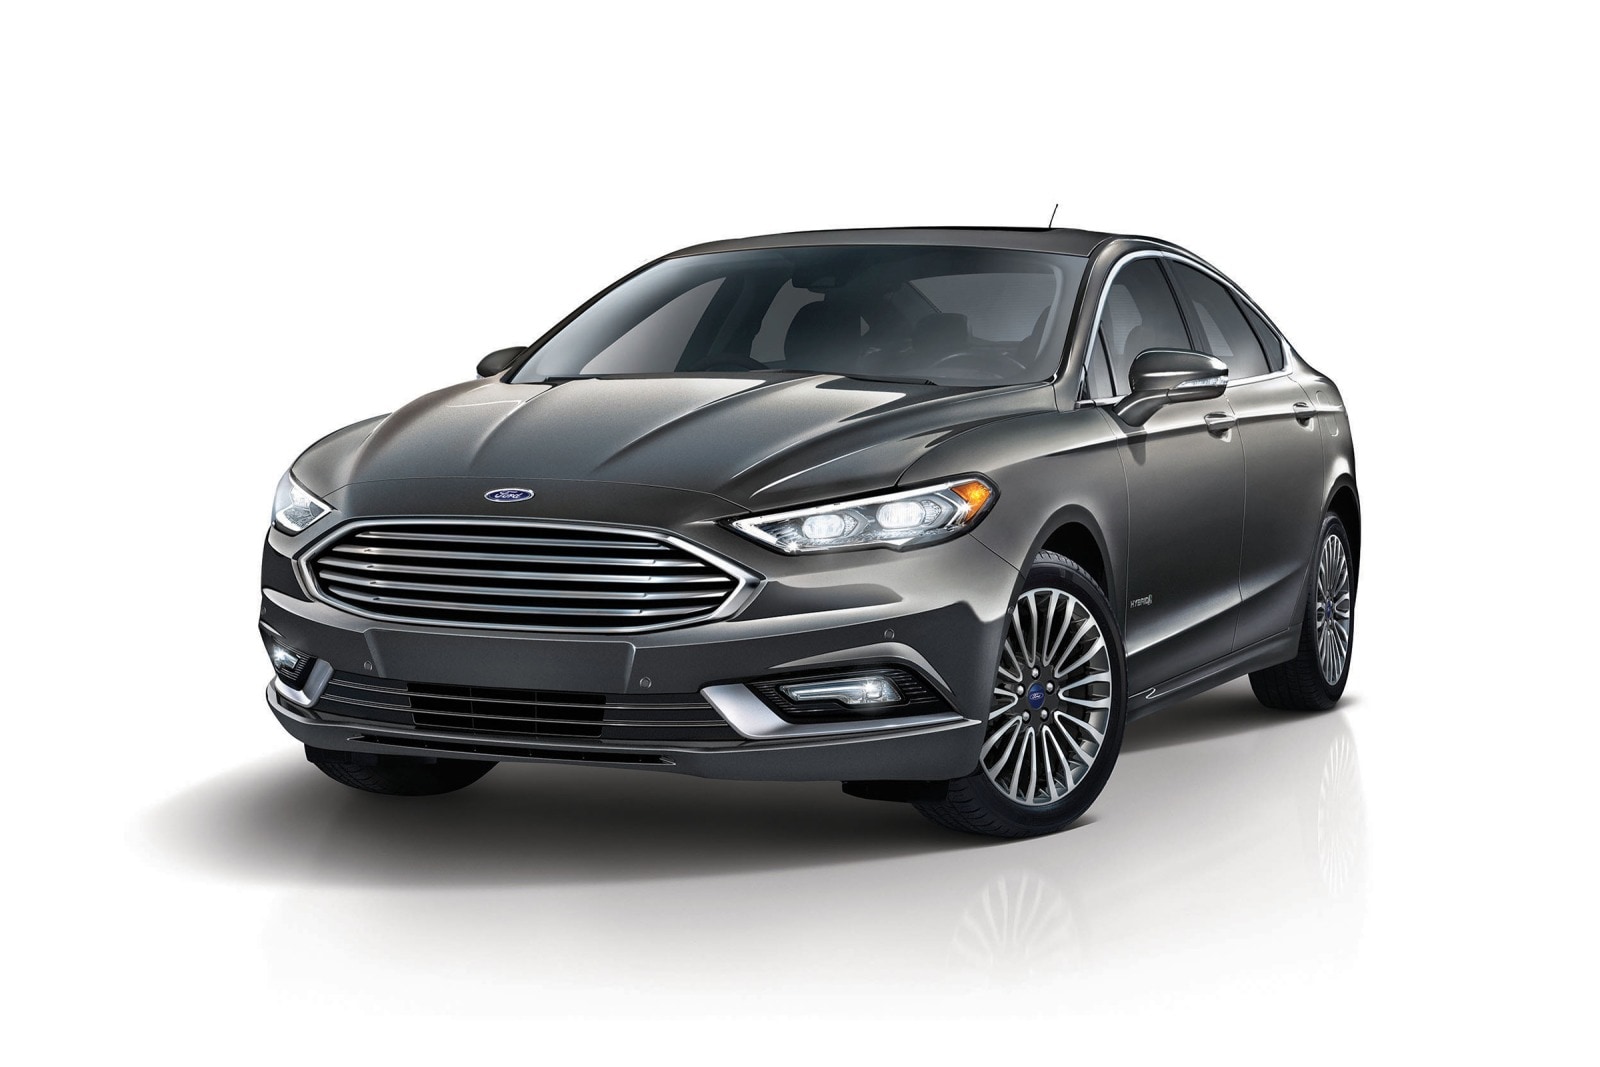 2018 Ford Fusion Hybrid Review & Ratings | Edmunds